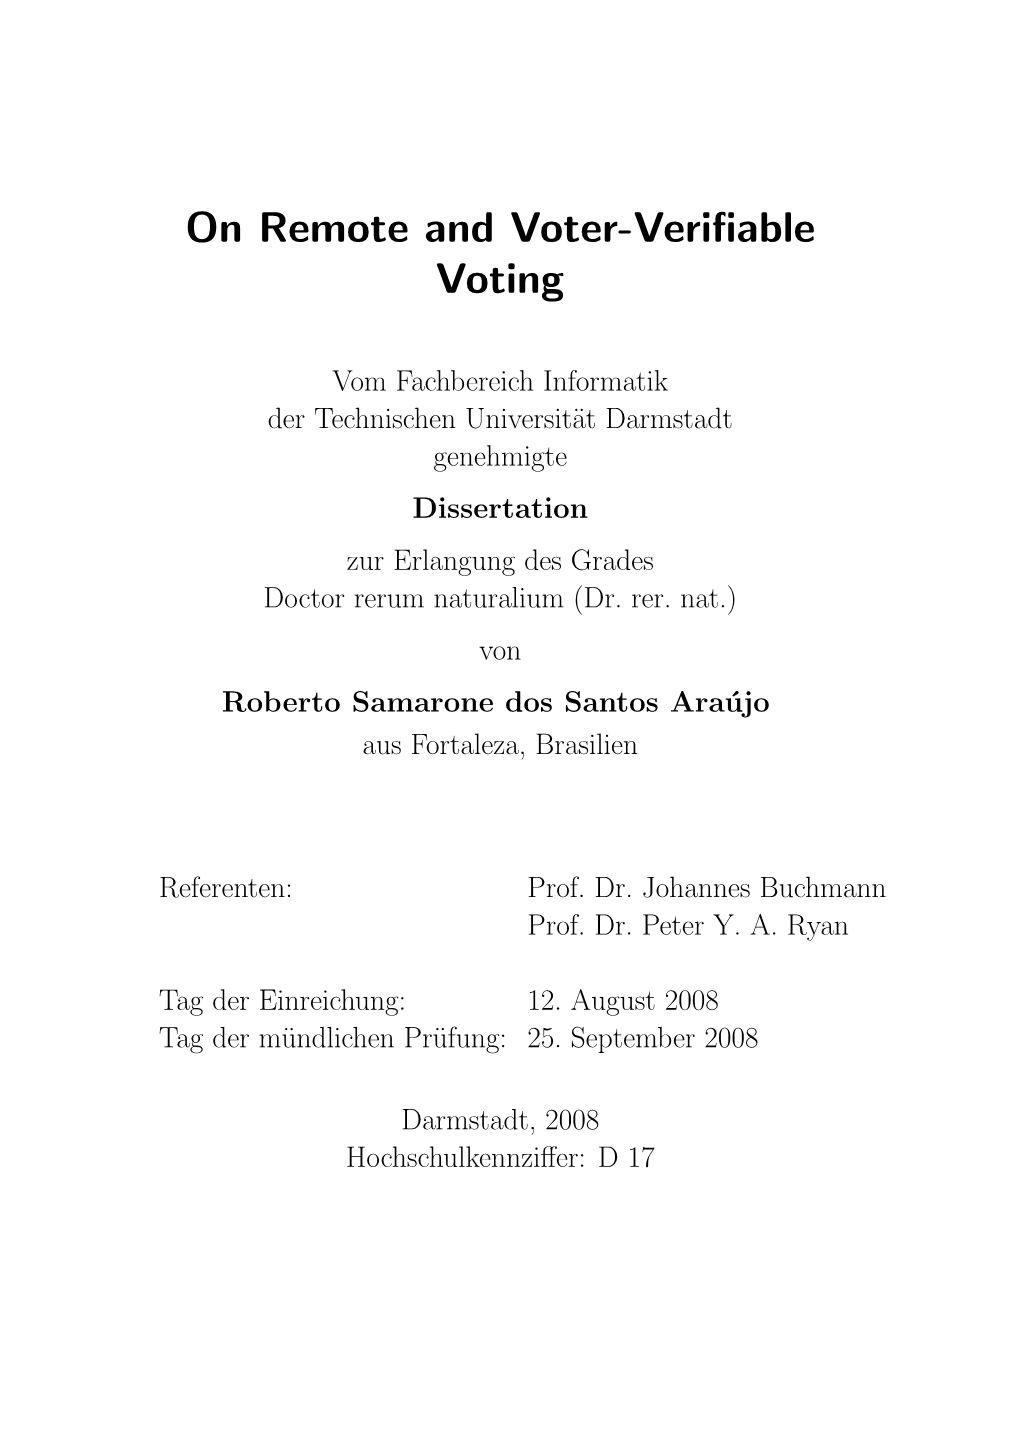 On Remote and Voter-Verifiable Voting